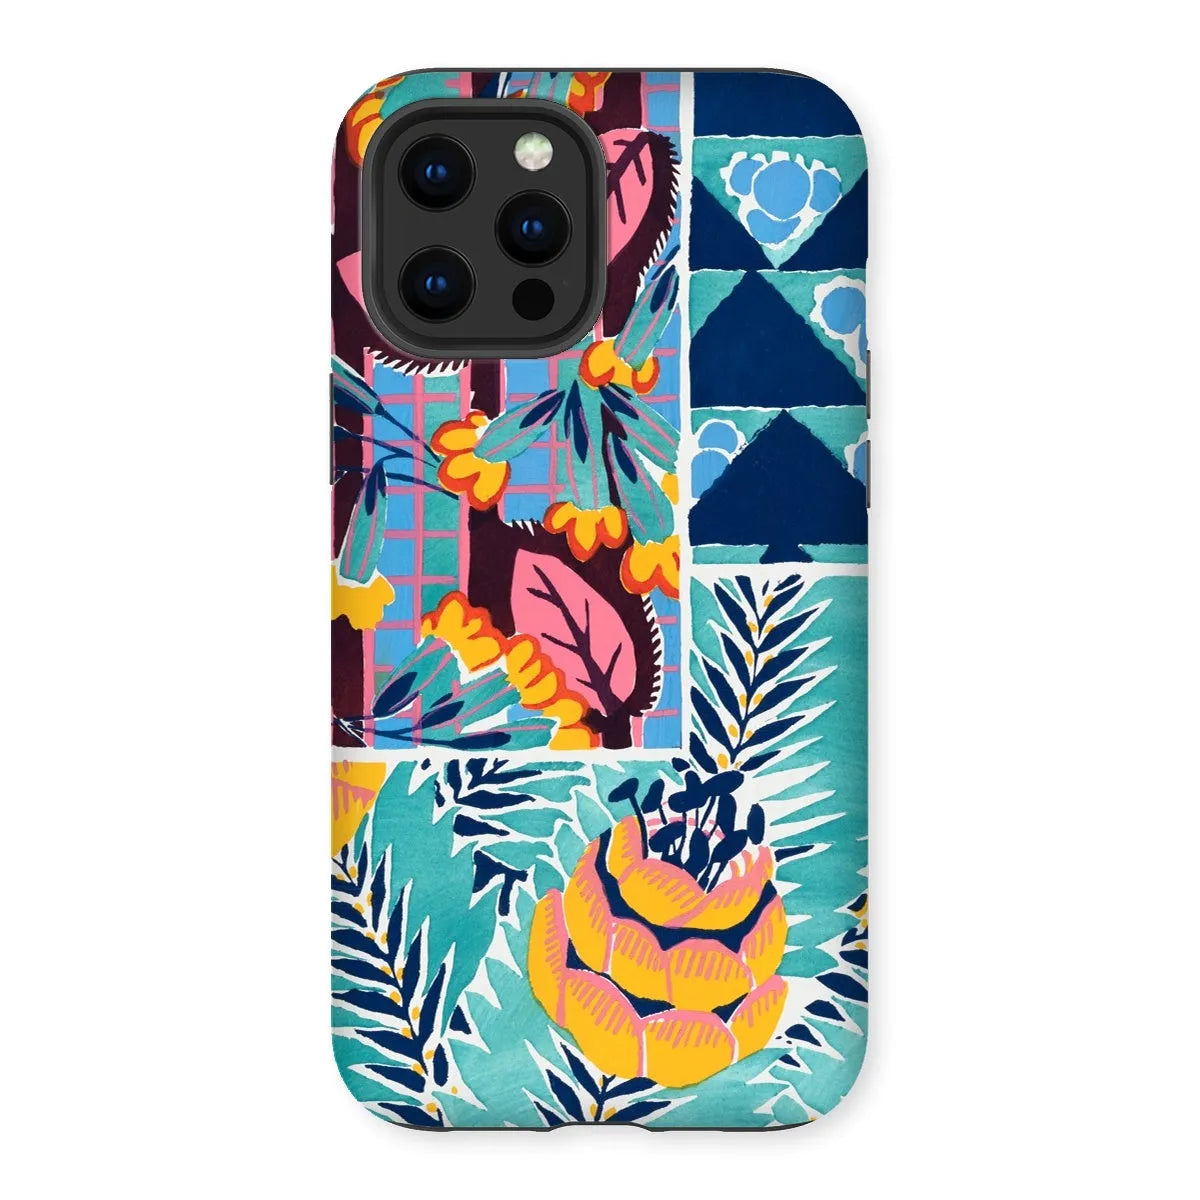 Fabric & Rugs - Pochoir Patterns Phone Case - E. A. Séguy - Iphone 13 Pro Max / Matte - Mobile Phone Cases